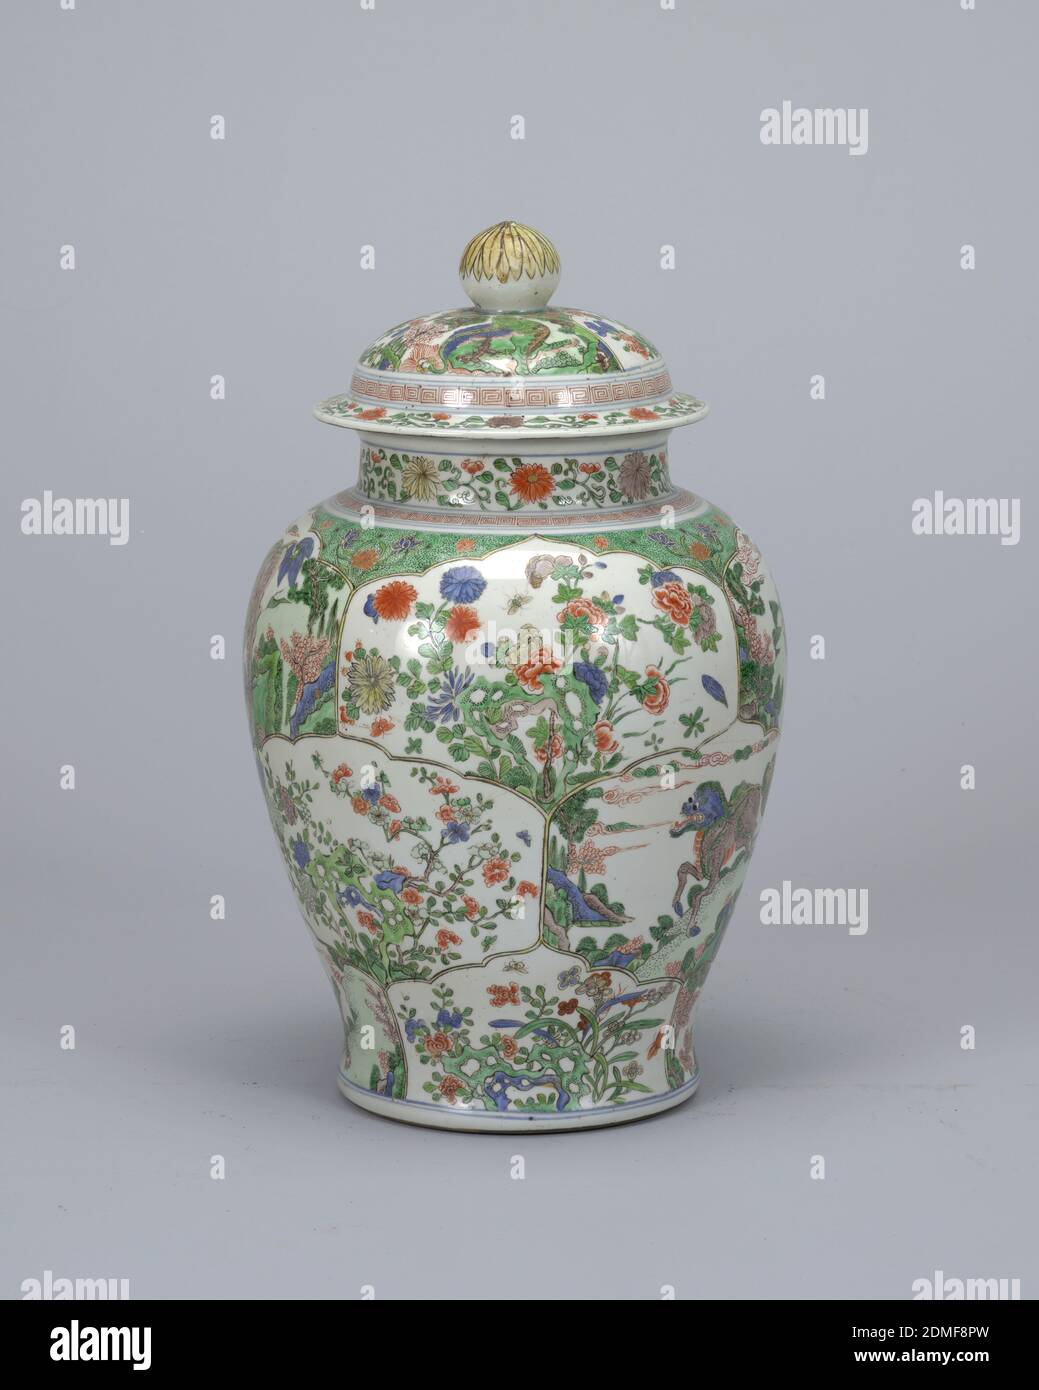 Ginger Jar, porcelain, vitreous enamel, Porcelain vase and cover with nature scenes and flowers along the sides and cover., China, 19th century, ceramics, Decorative Arts, jar, jar Stock Photo